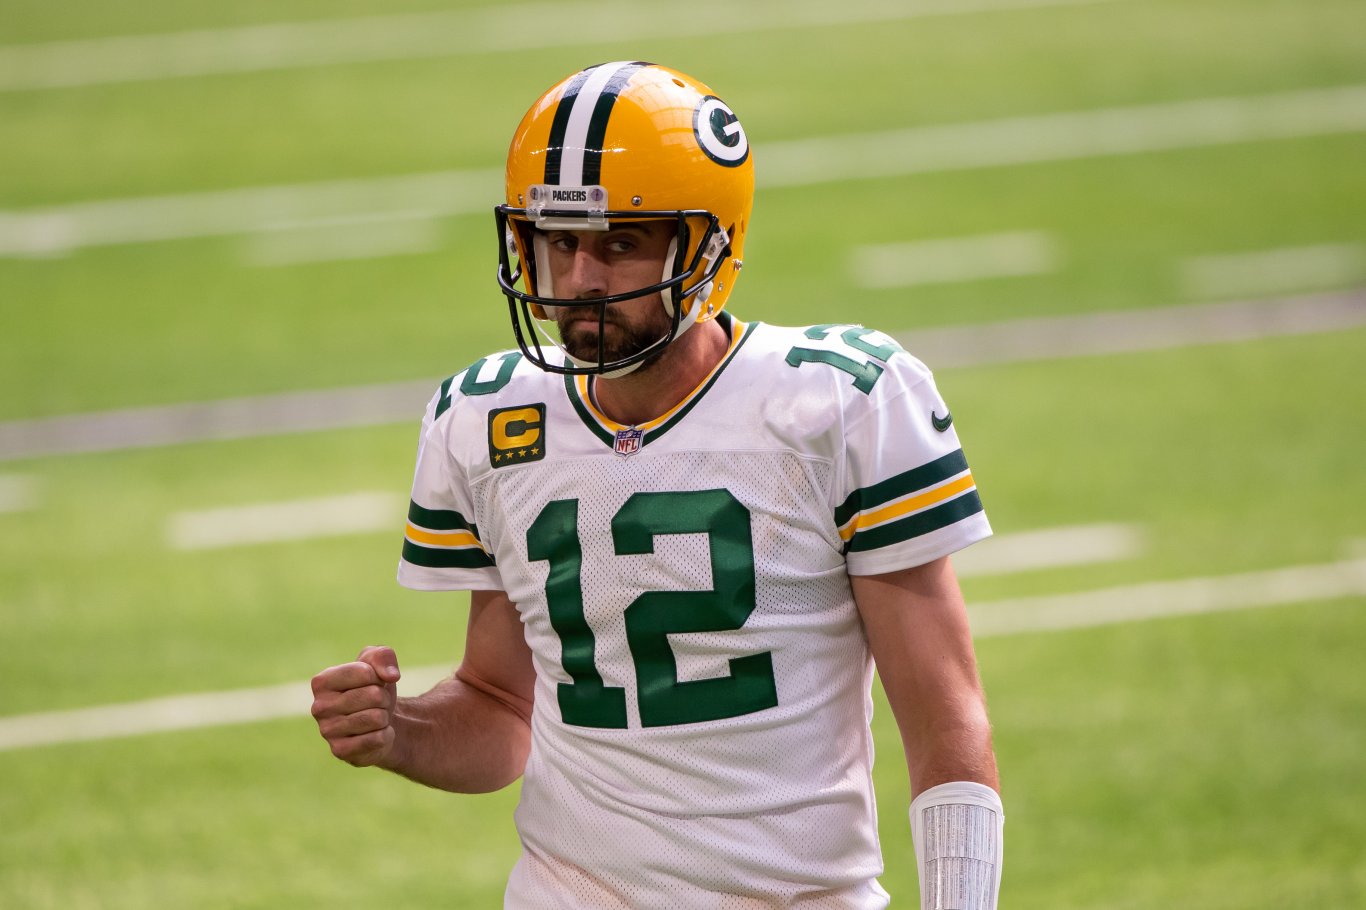 Shocking Aaron Rodgers trade shakes up Packers 7-round mock draft